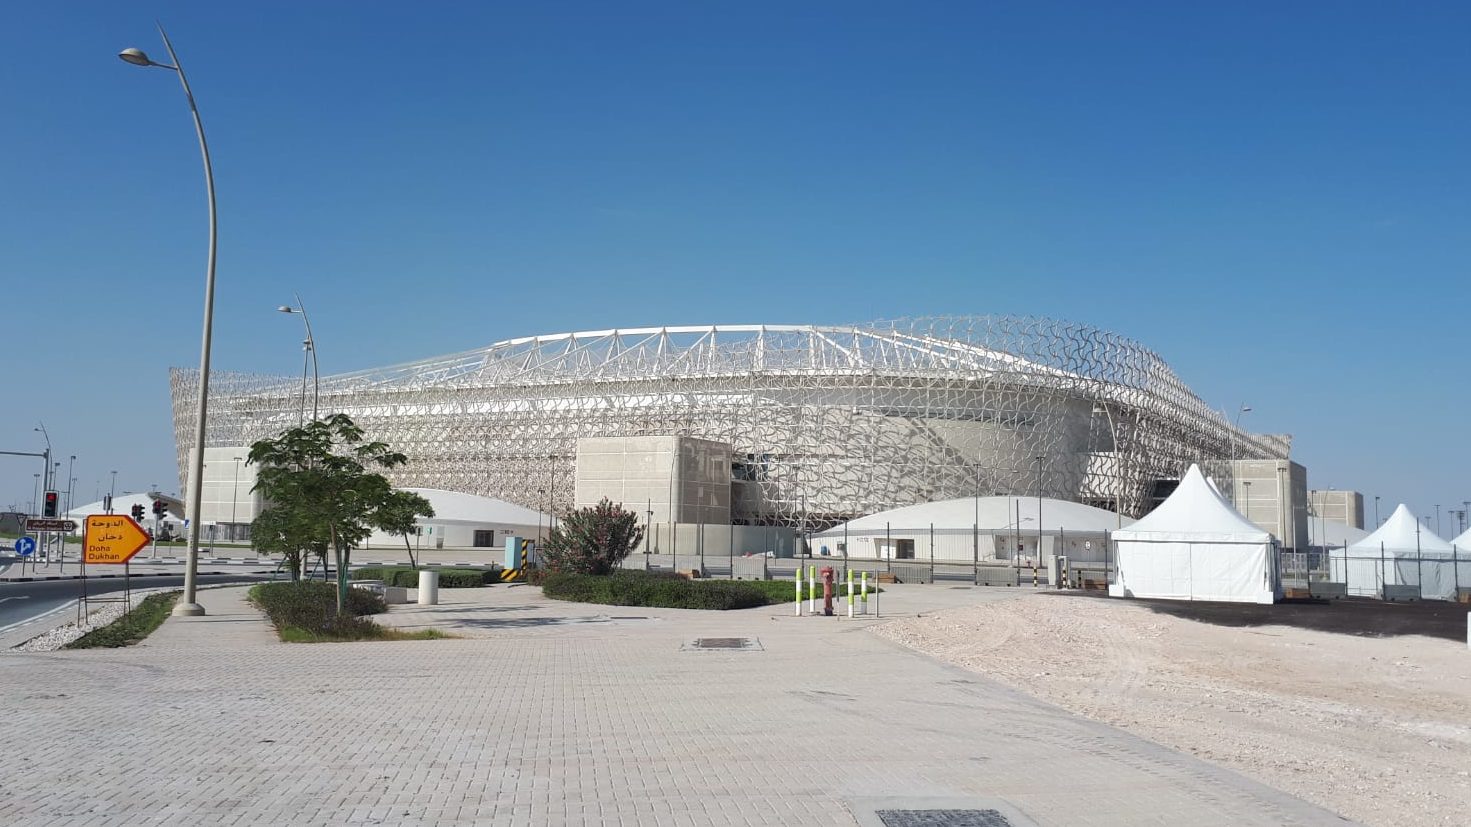 Foreign Policy is the Real Reason Qatar is Hosting FIFA’s World Cup